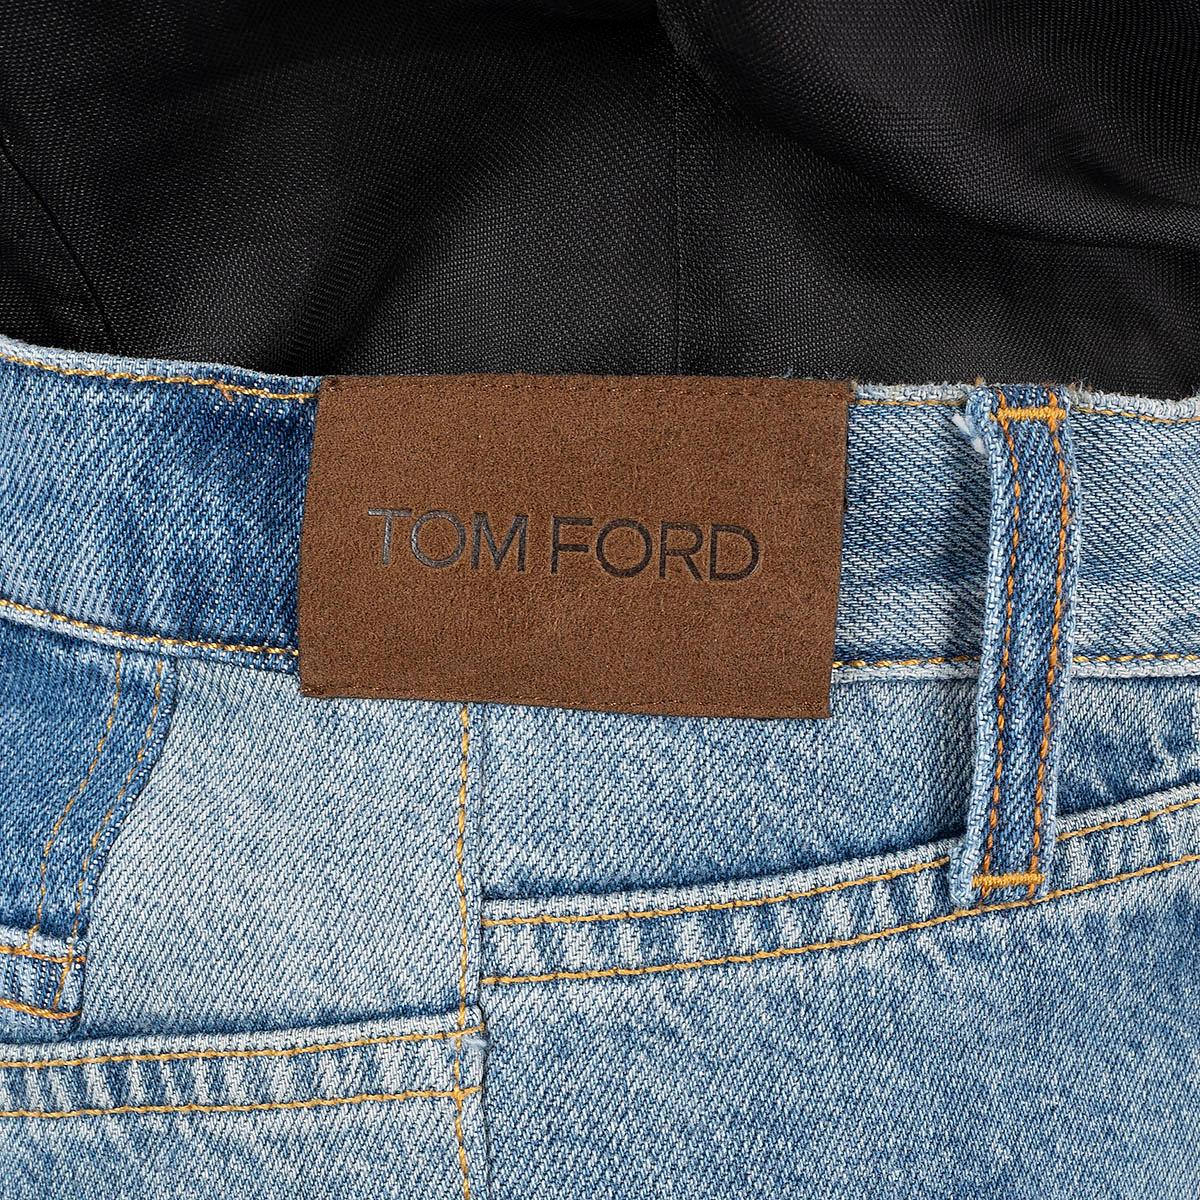 TOM FORD blue denim 2020 LEATHER TRIM PATCHWORK WIDE LEG Jeans Pants 24 XS For Sale 2